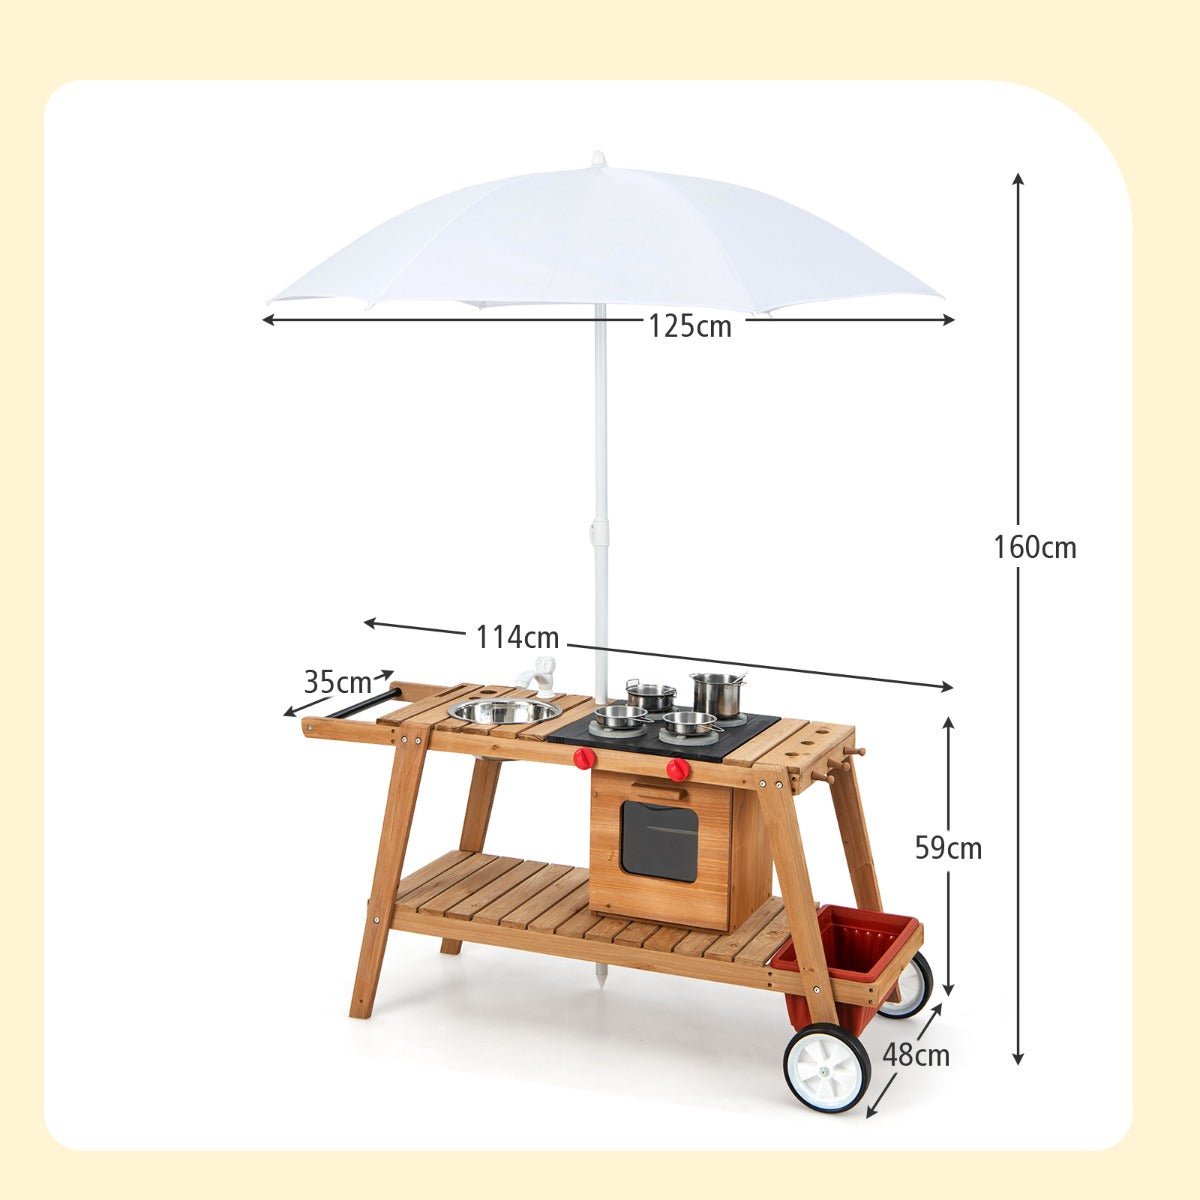 Cook and Play: Outdoor Cooking Set with Removable Umbrella